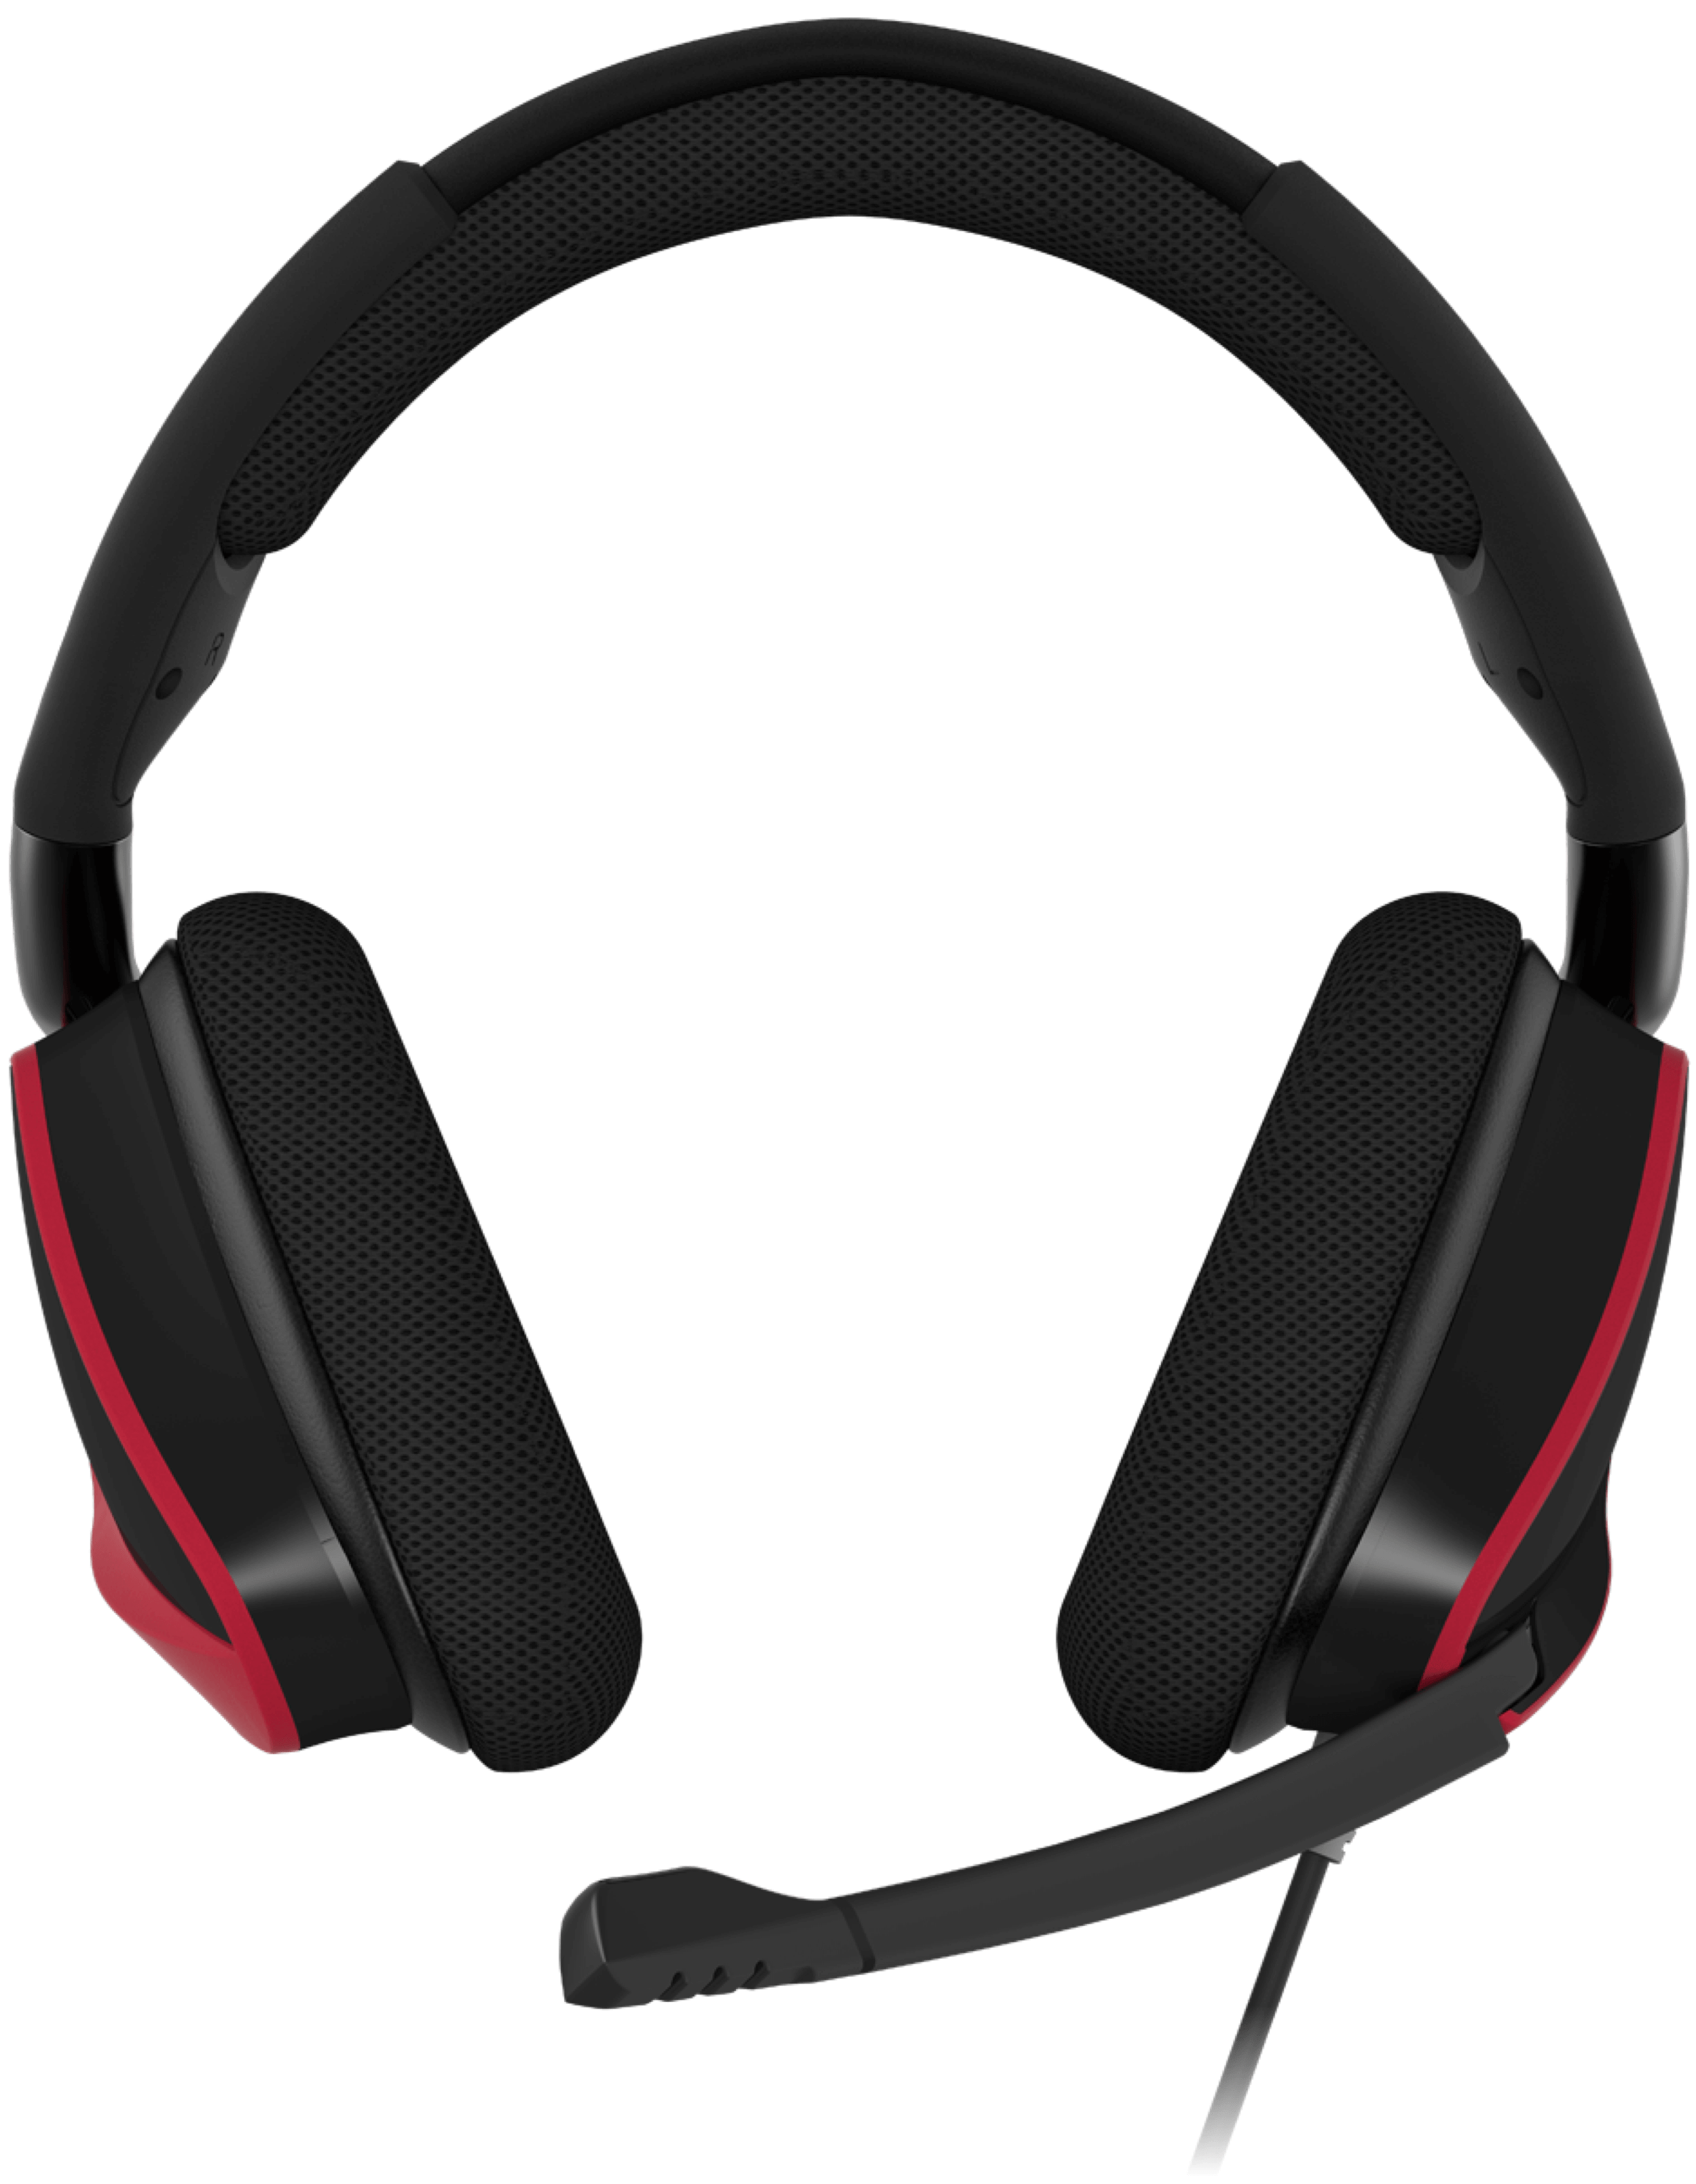 corsair wireless headset for xbox one